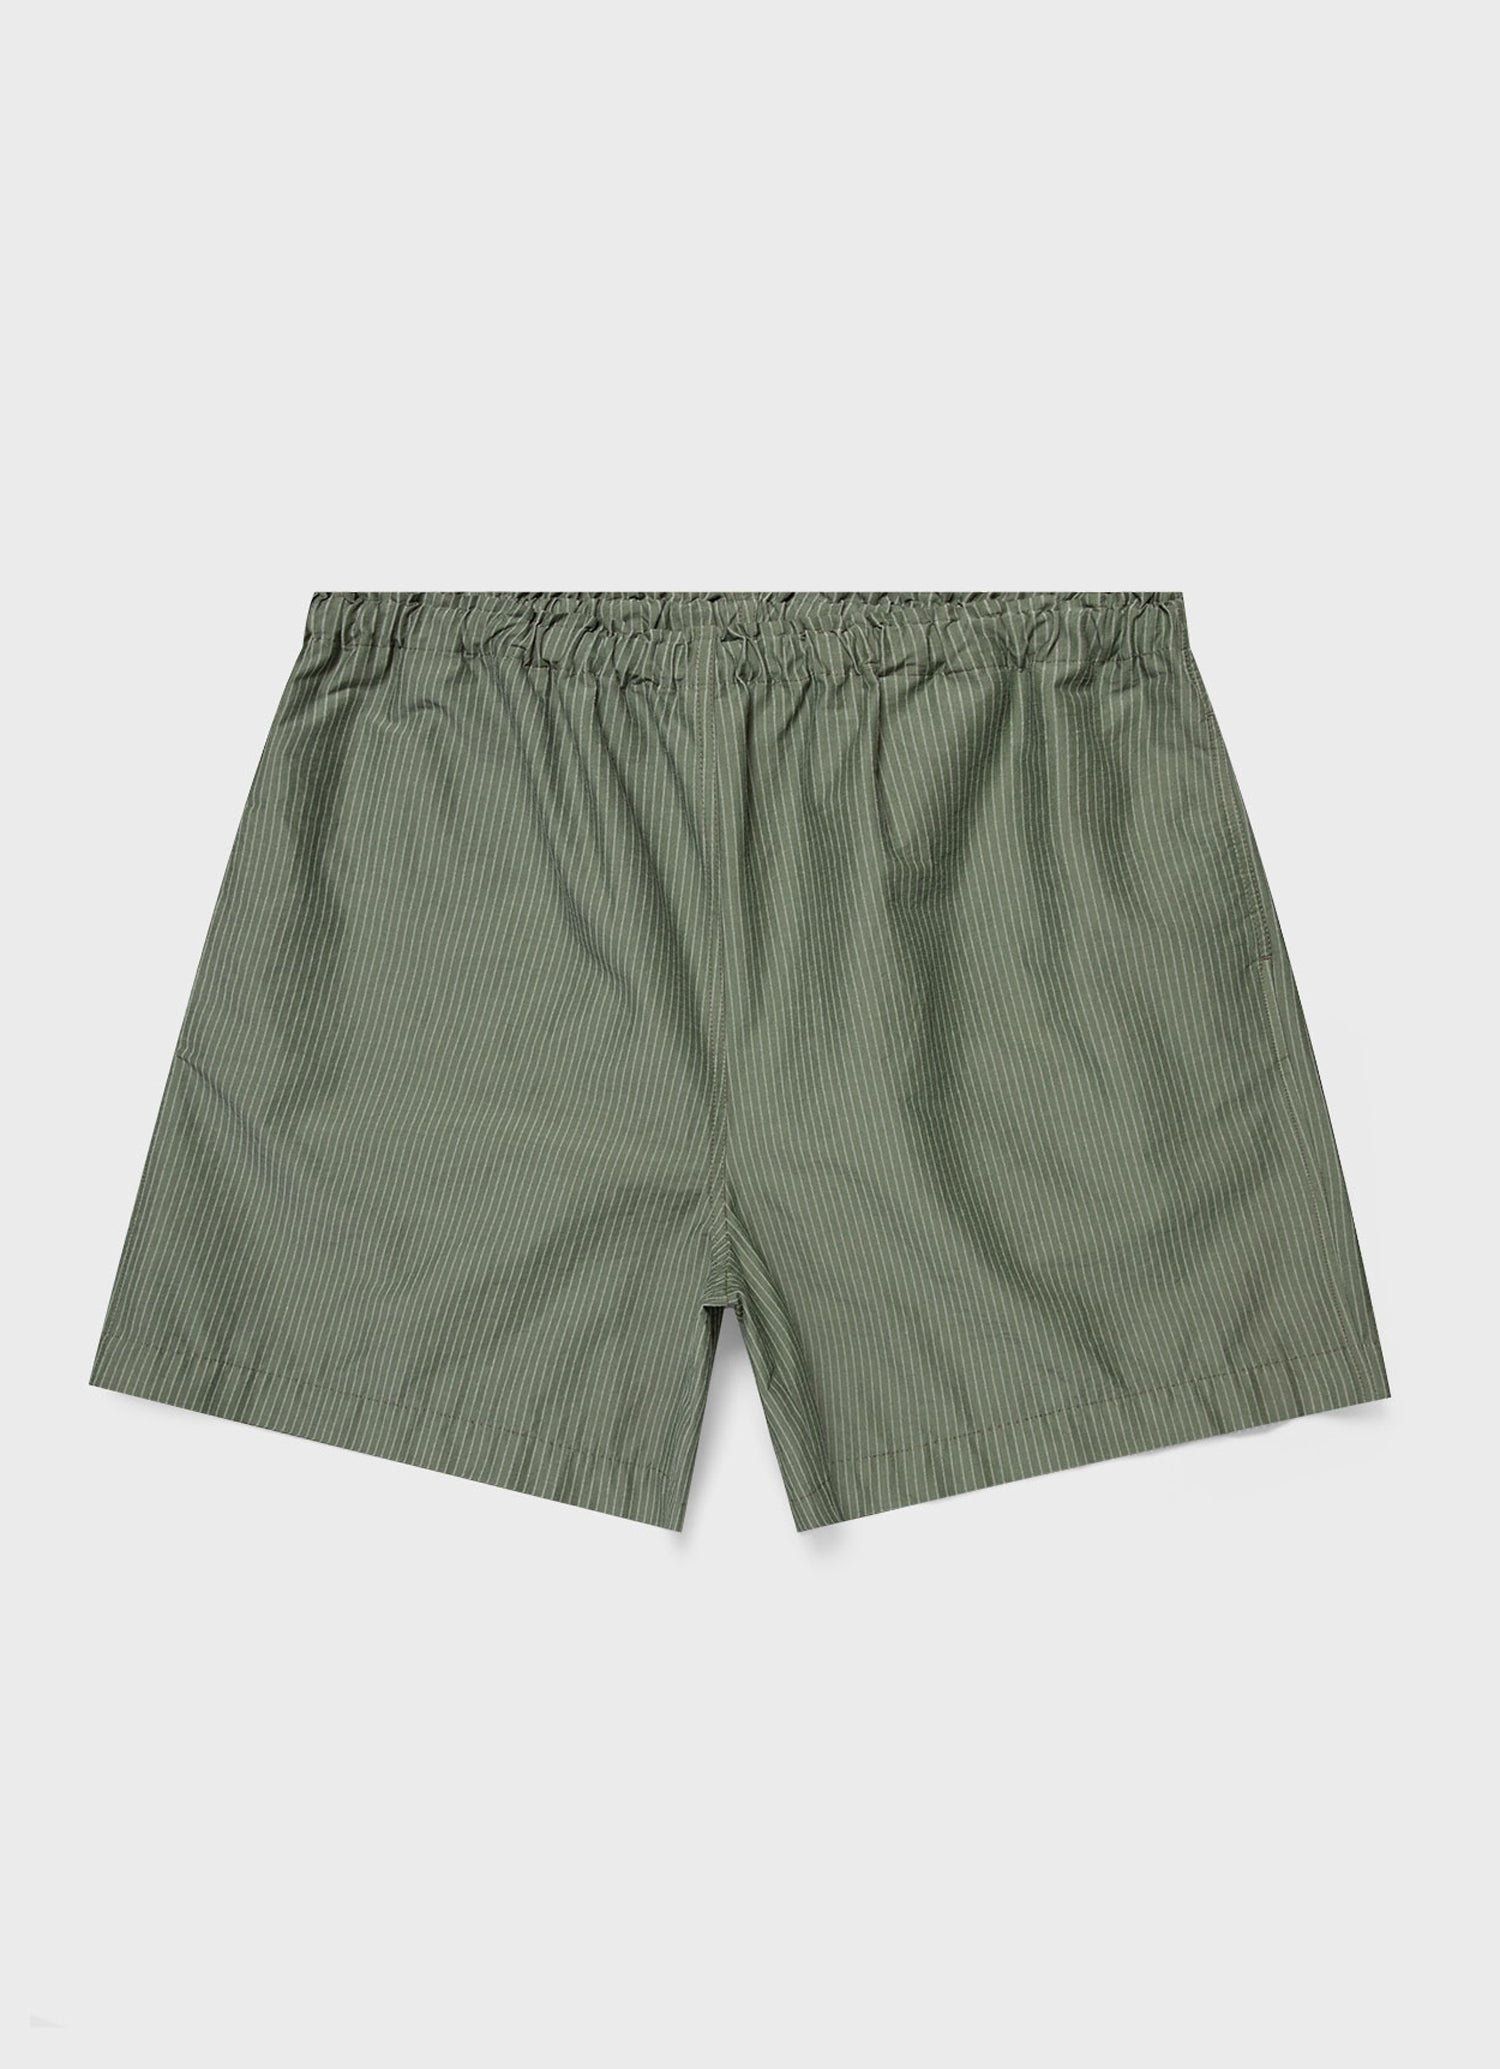 Nigel Cabourn x Sunspel Ripstop Army Short in Army Green - 1